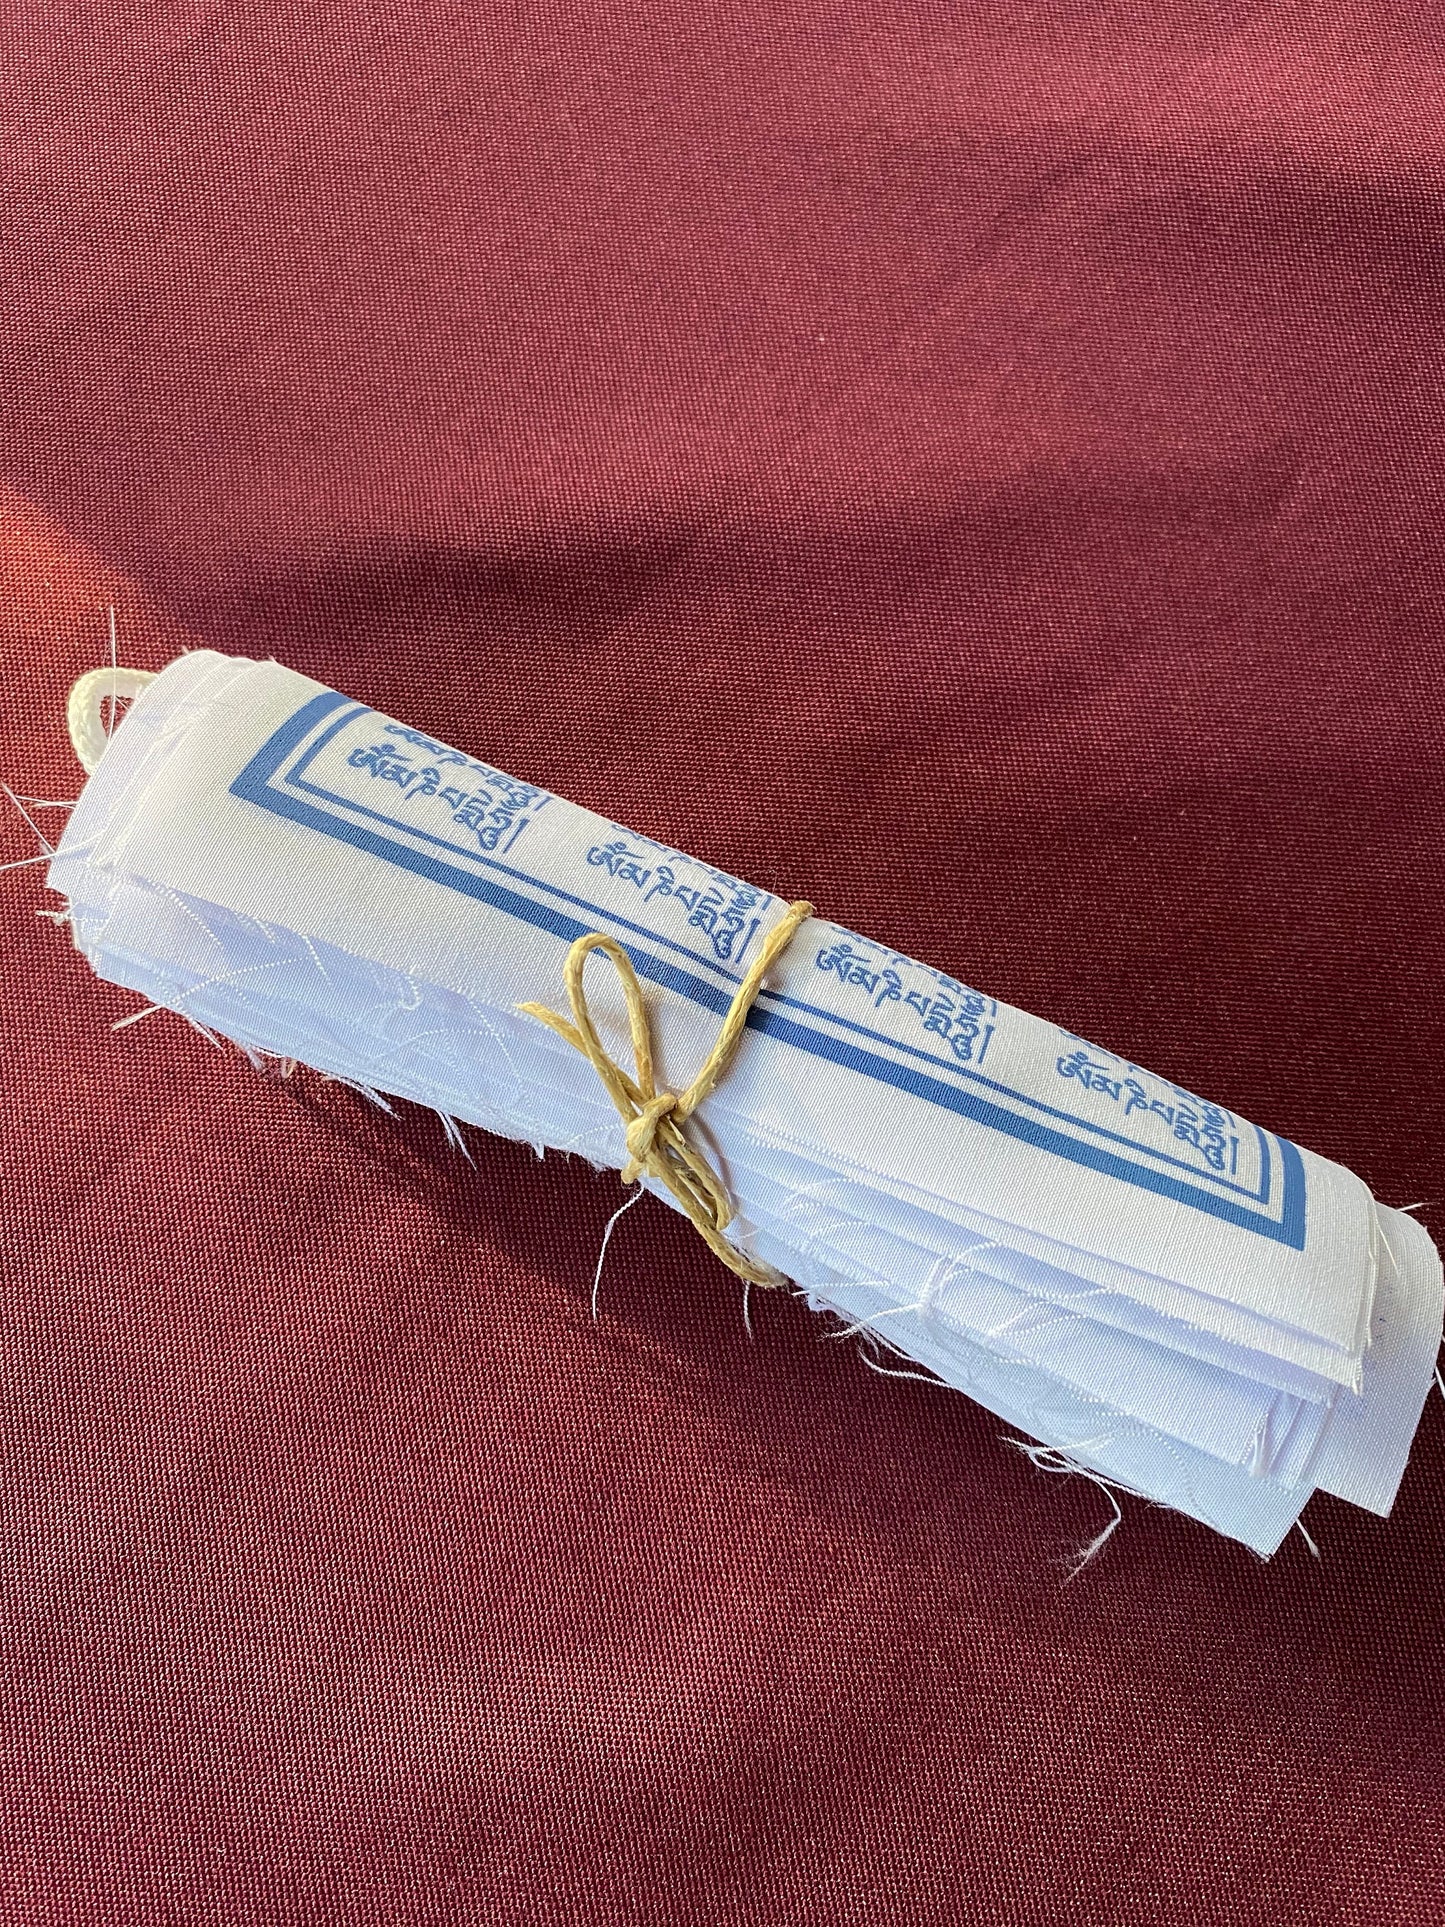 A close of of one roll of 10 all white 1000 Armed Chenrezig flags imprinted in blue on a medium background. Uplifting and beautiful.